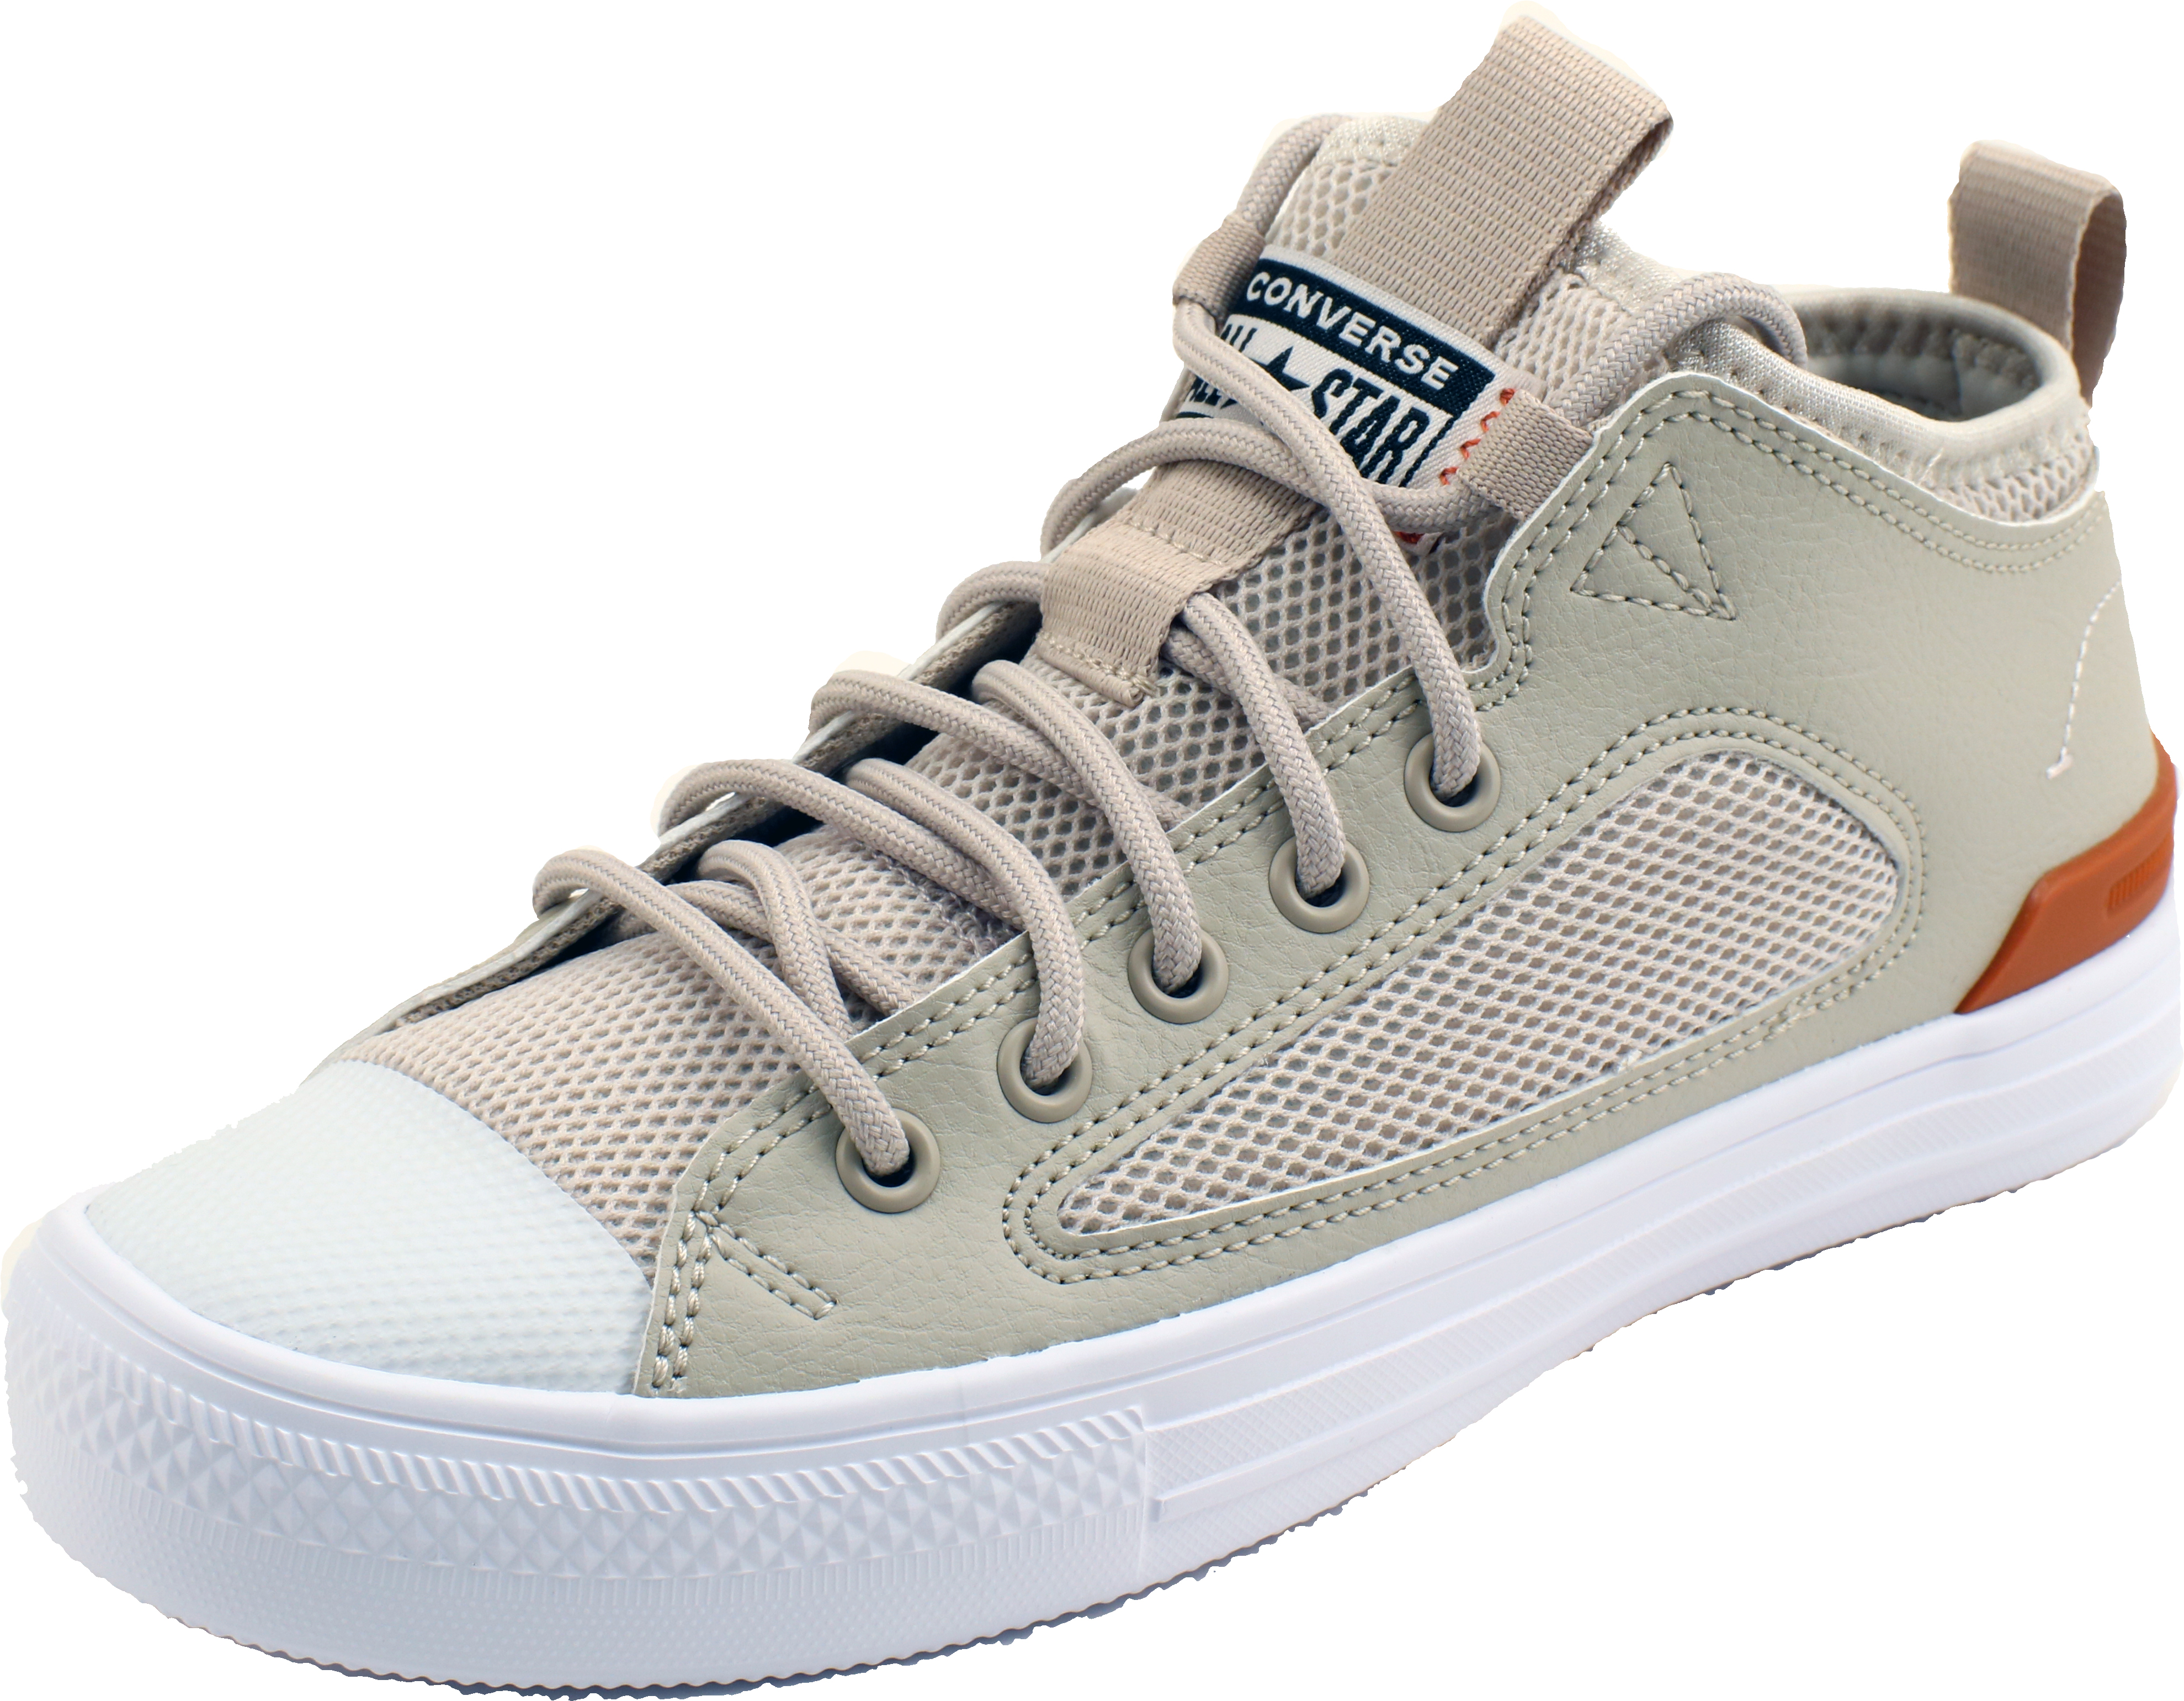 Converse Ctas Ultra Lightweight - String / Pale Putty / Rot Synthetik